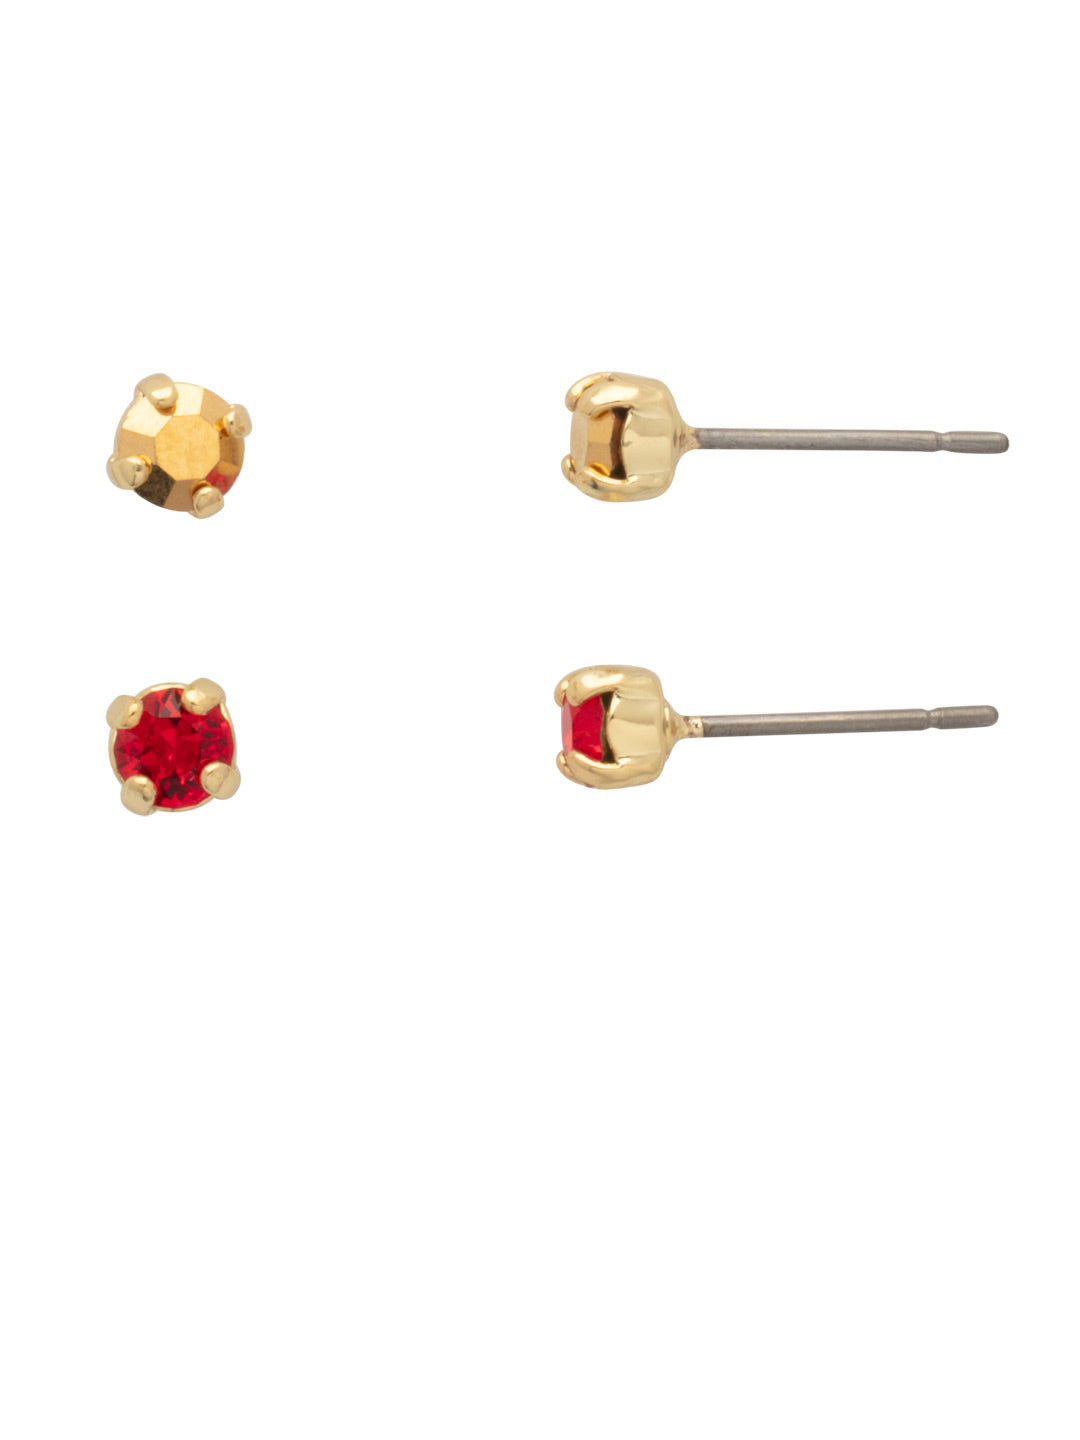 June Set Stud Earrings - EFM6BGGGA - <p>The June Set Stud Earrings feature two pairs of round-cut crystal studs. From Sorrelli's Go Garnet collection in our Bright Gold-tone finish.</p>